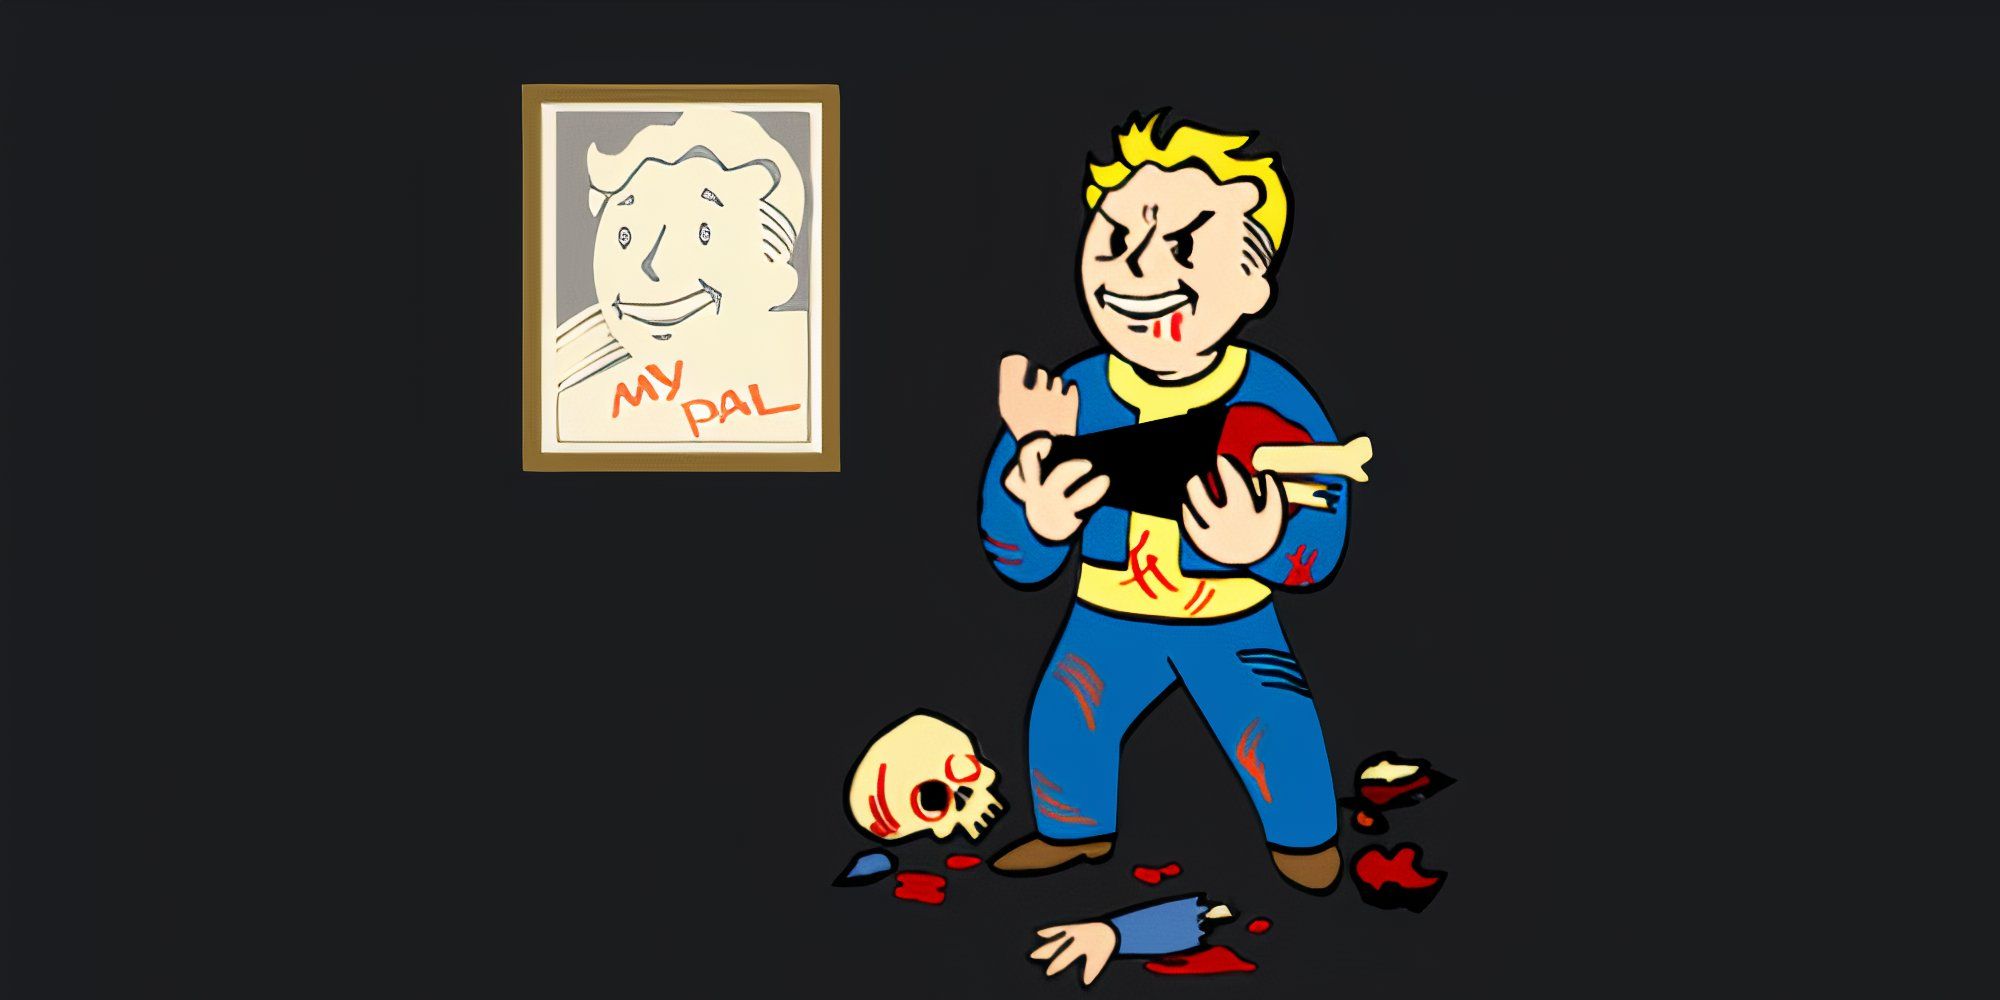 Vault Boy holds a bony leg up to his face with an evil look on his face